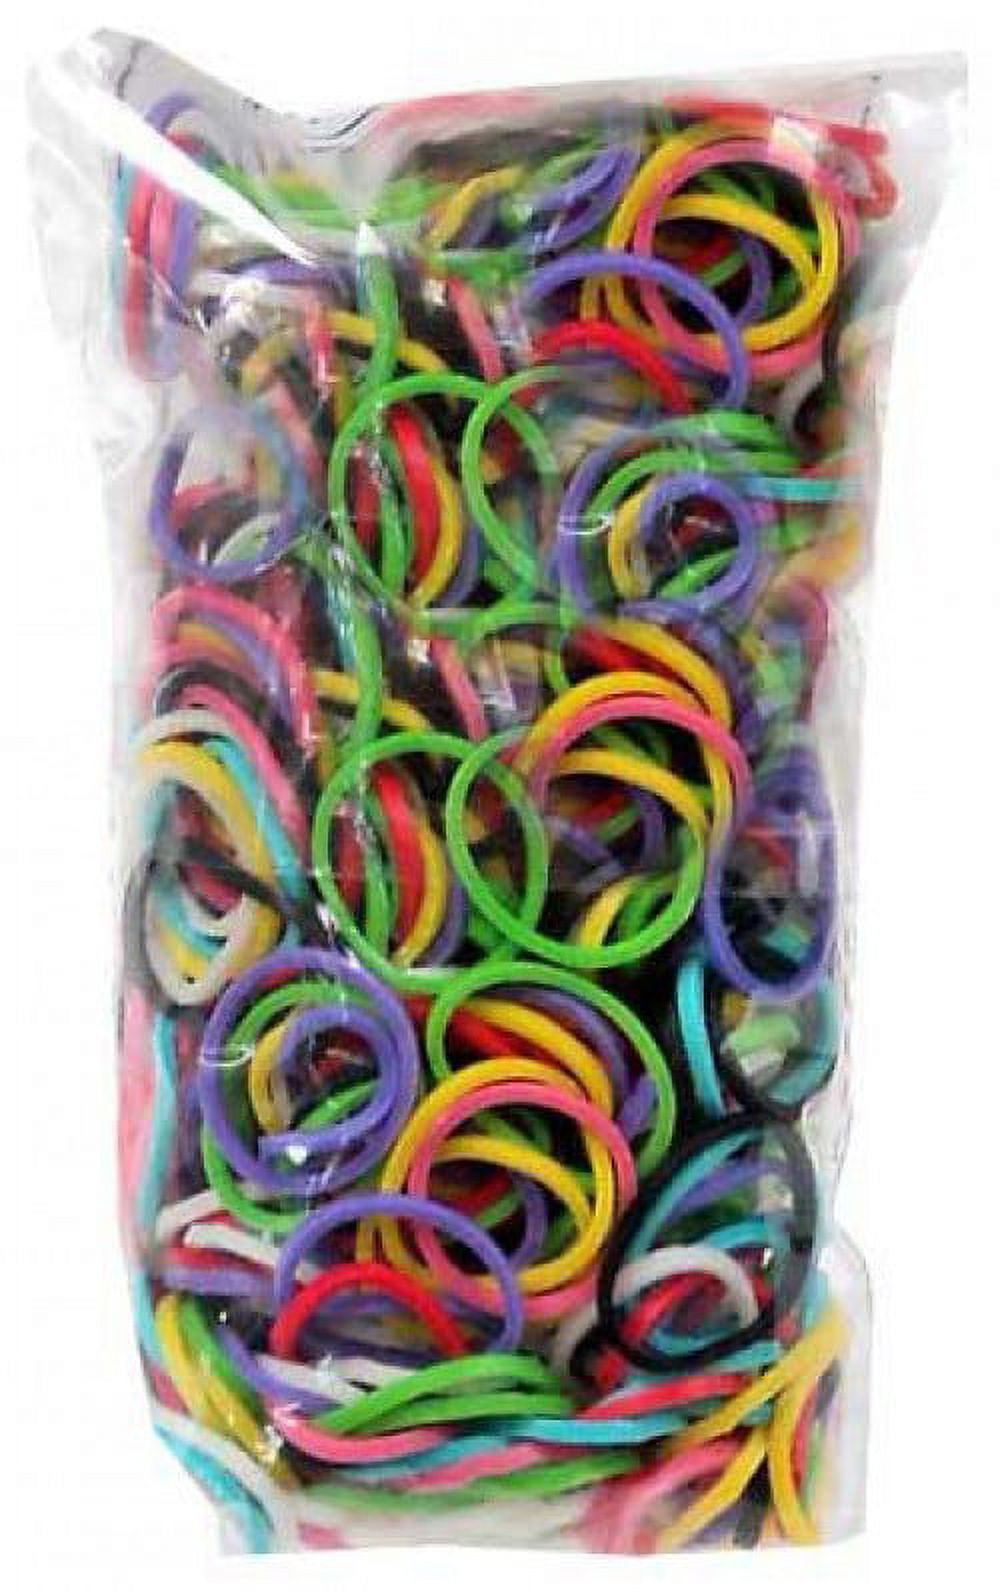 Rainbow Loom Multi-Color Rubber Bands Refill Pack [600 ct, NO C-CLIPS]